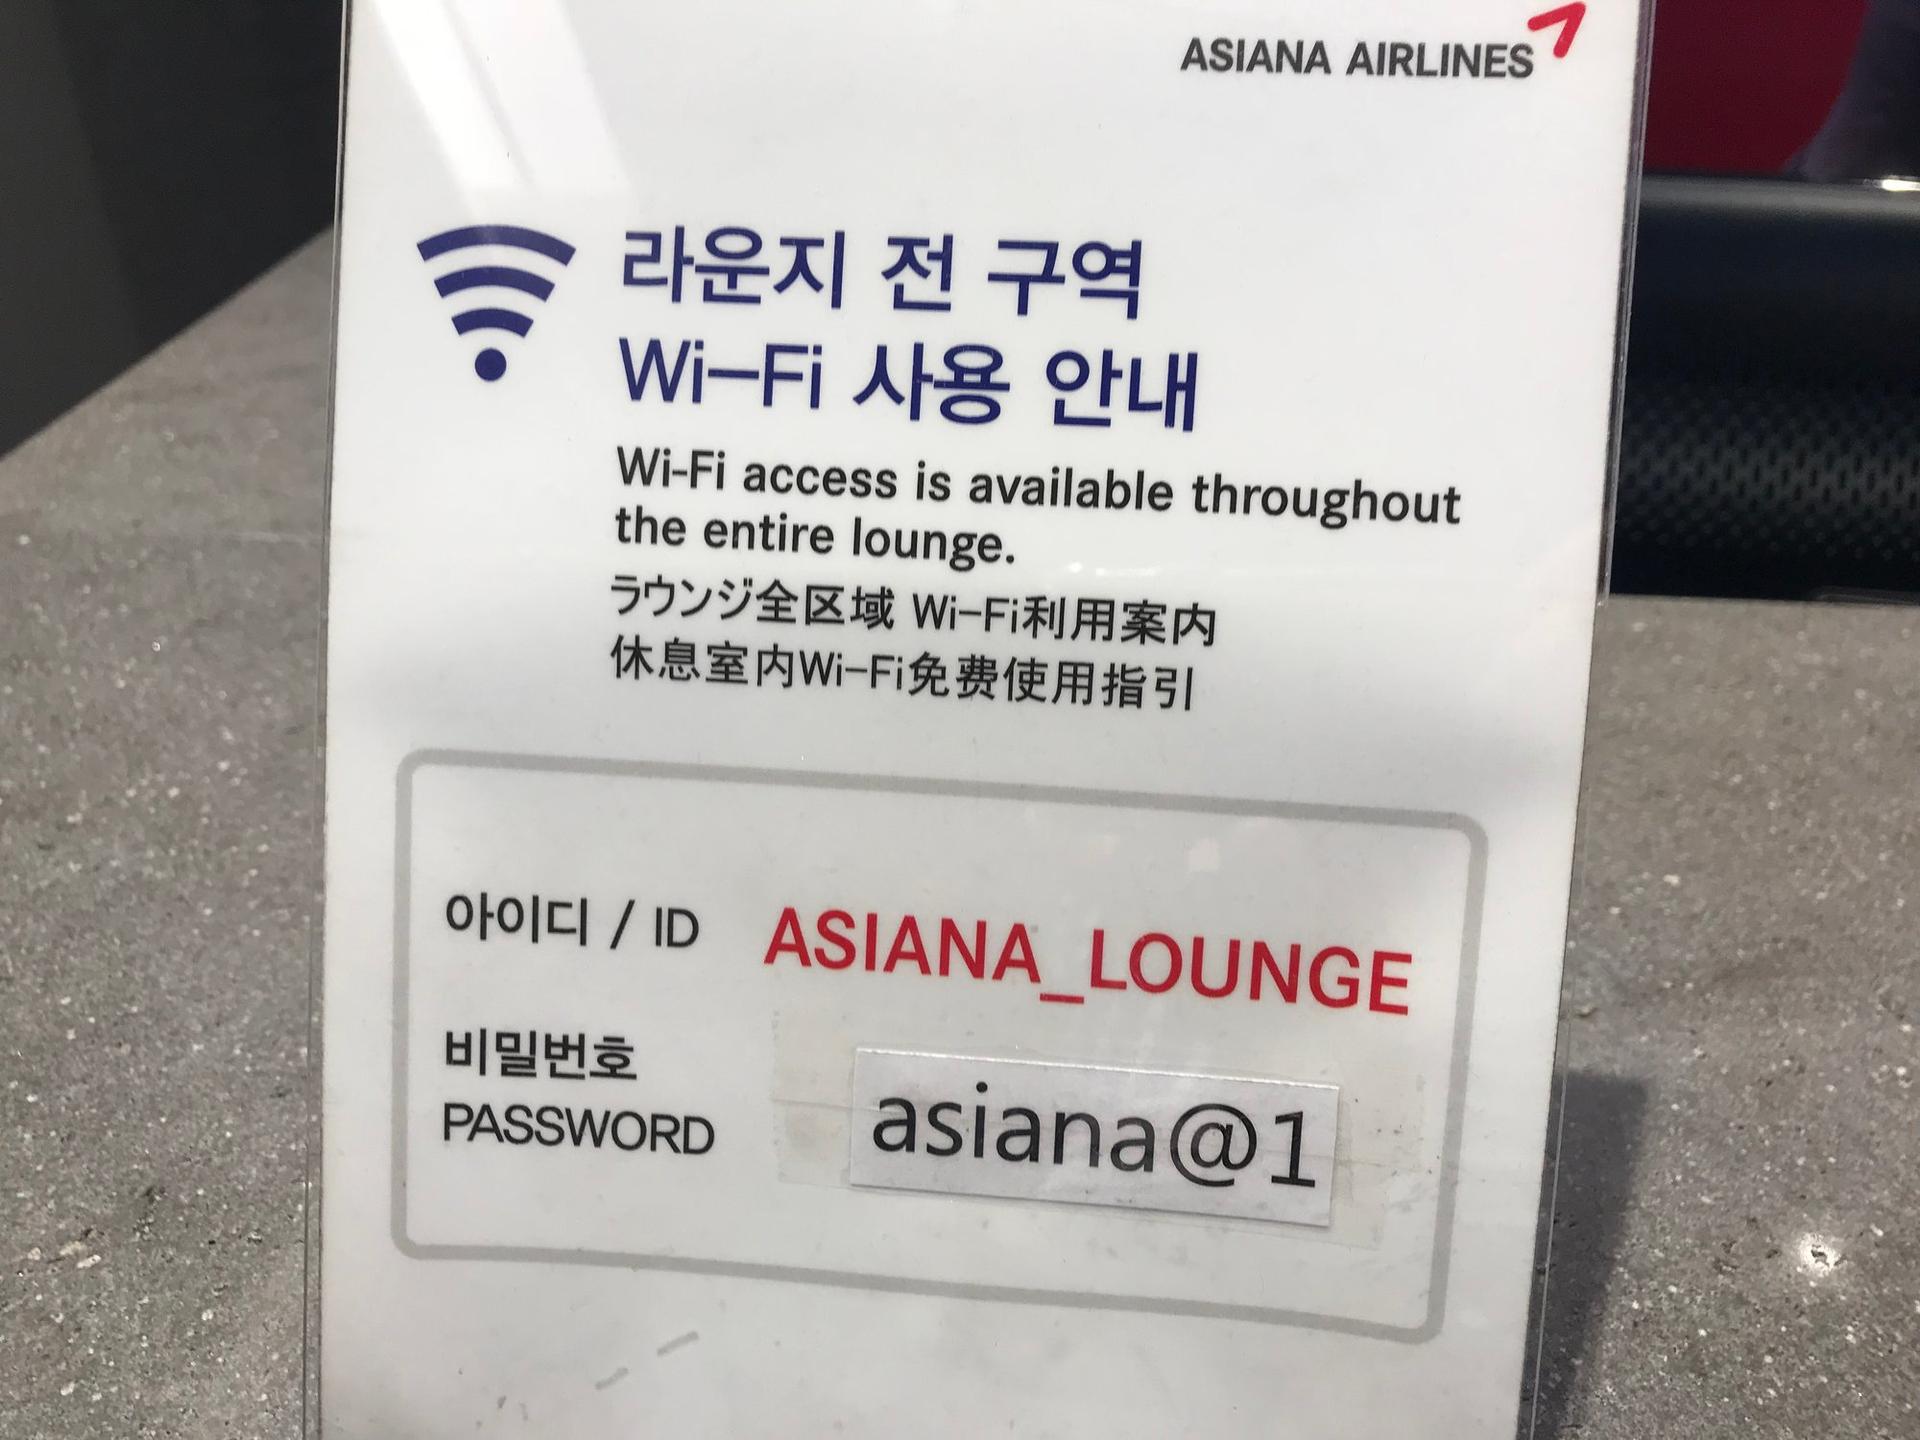 Asiana Airlines Lounge image 16 of 24